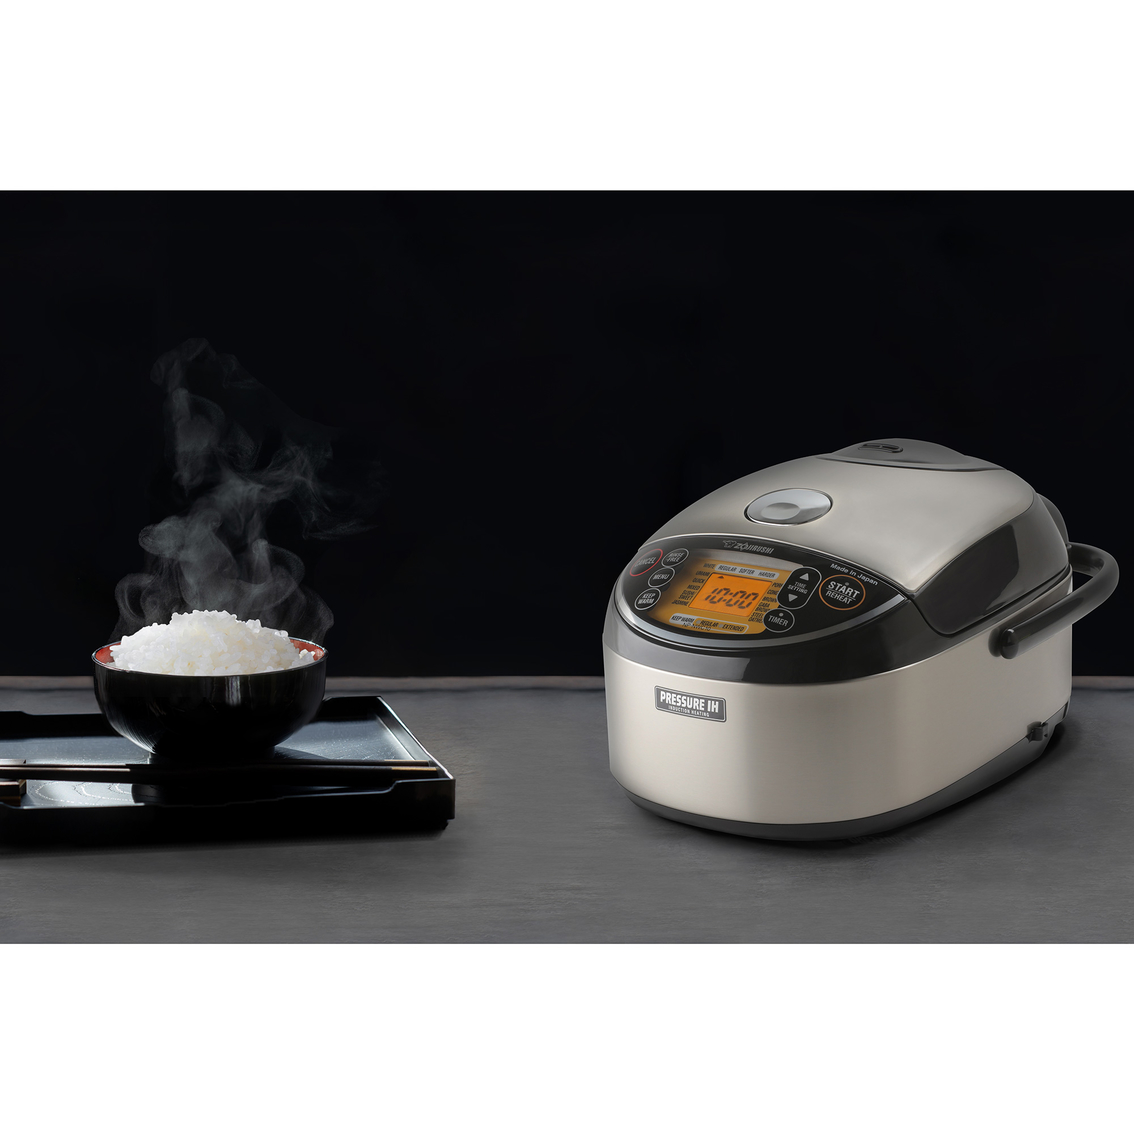 Zojirushi Pressure Induction Heating Rice Cooker and Warmer - Image 4 of 4